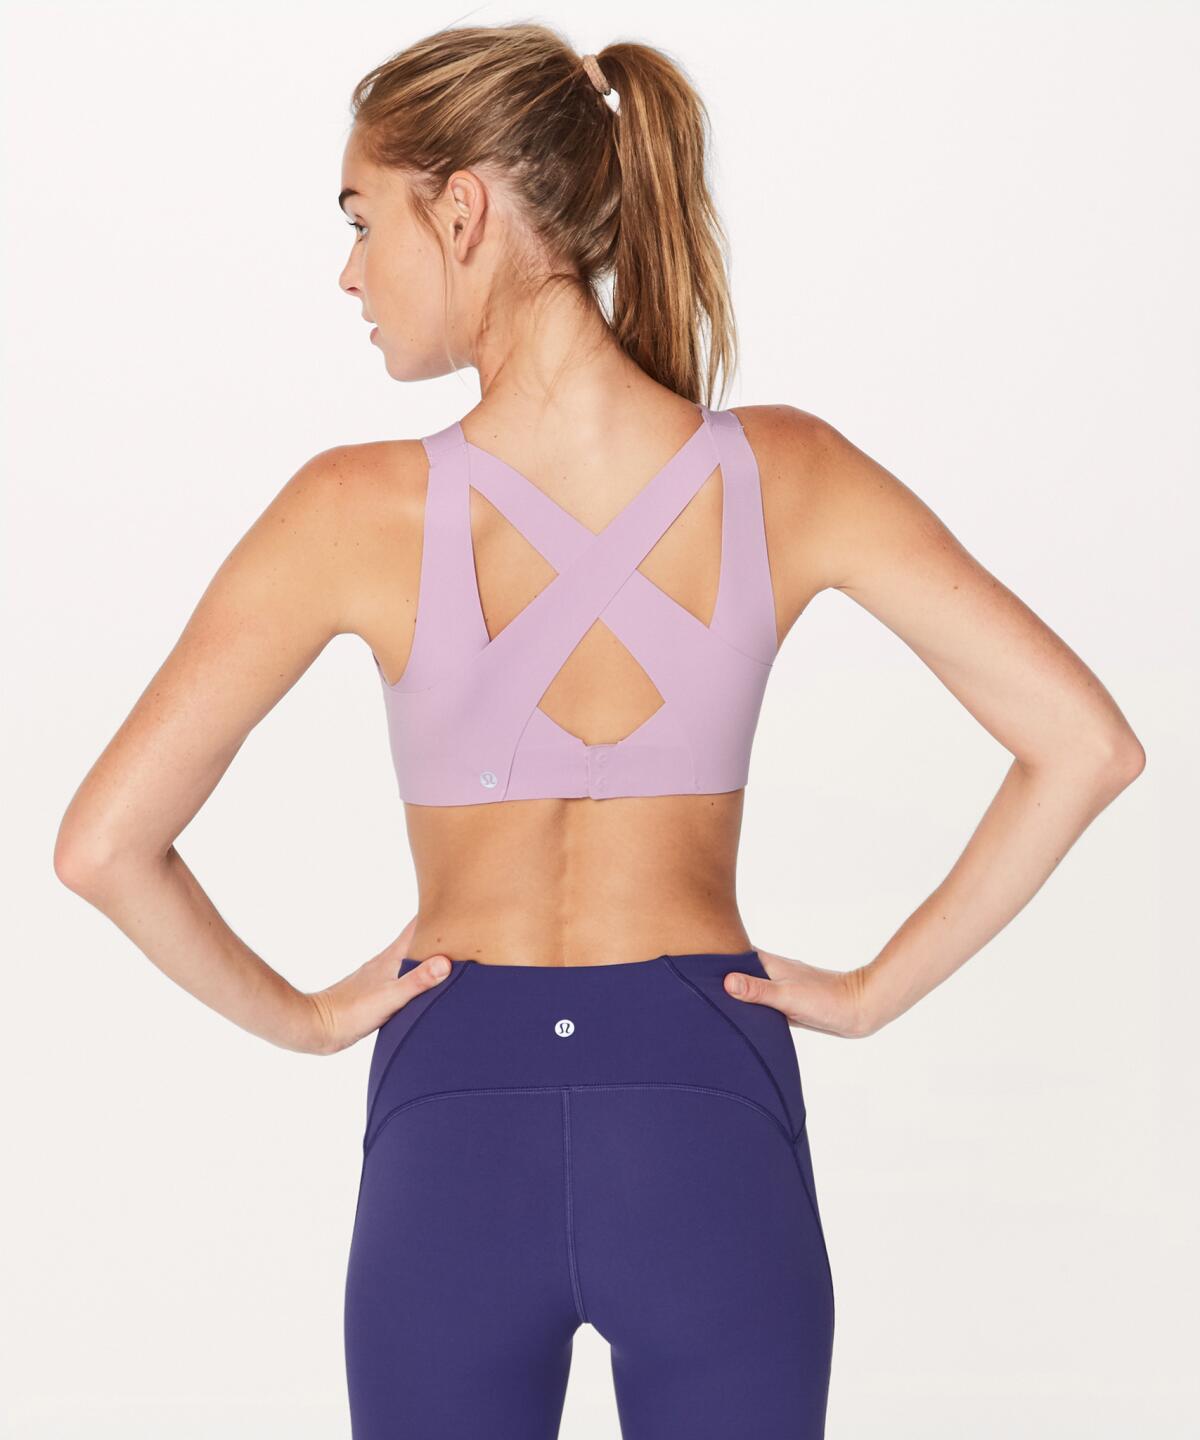 Fit-To Size: Lululemon wasn't at the Activewear trend show but their Enlite Bra is an example of the trend toward more specific sizing: ($98, shop.lululemon.com)